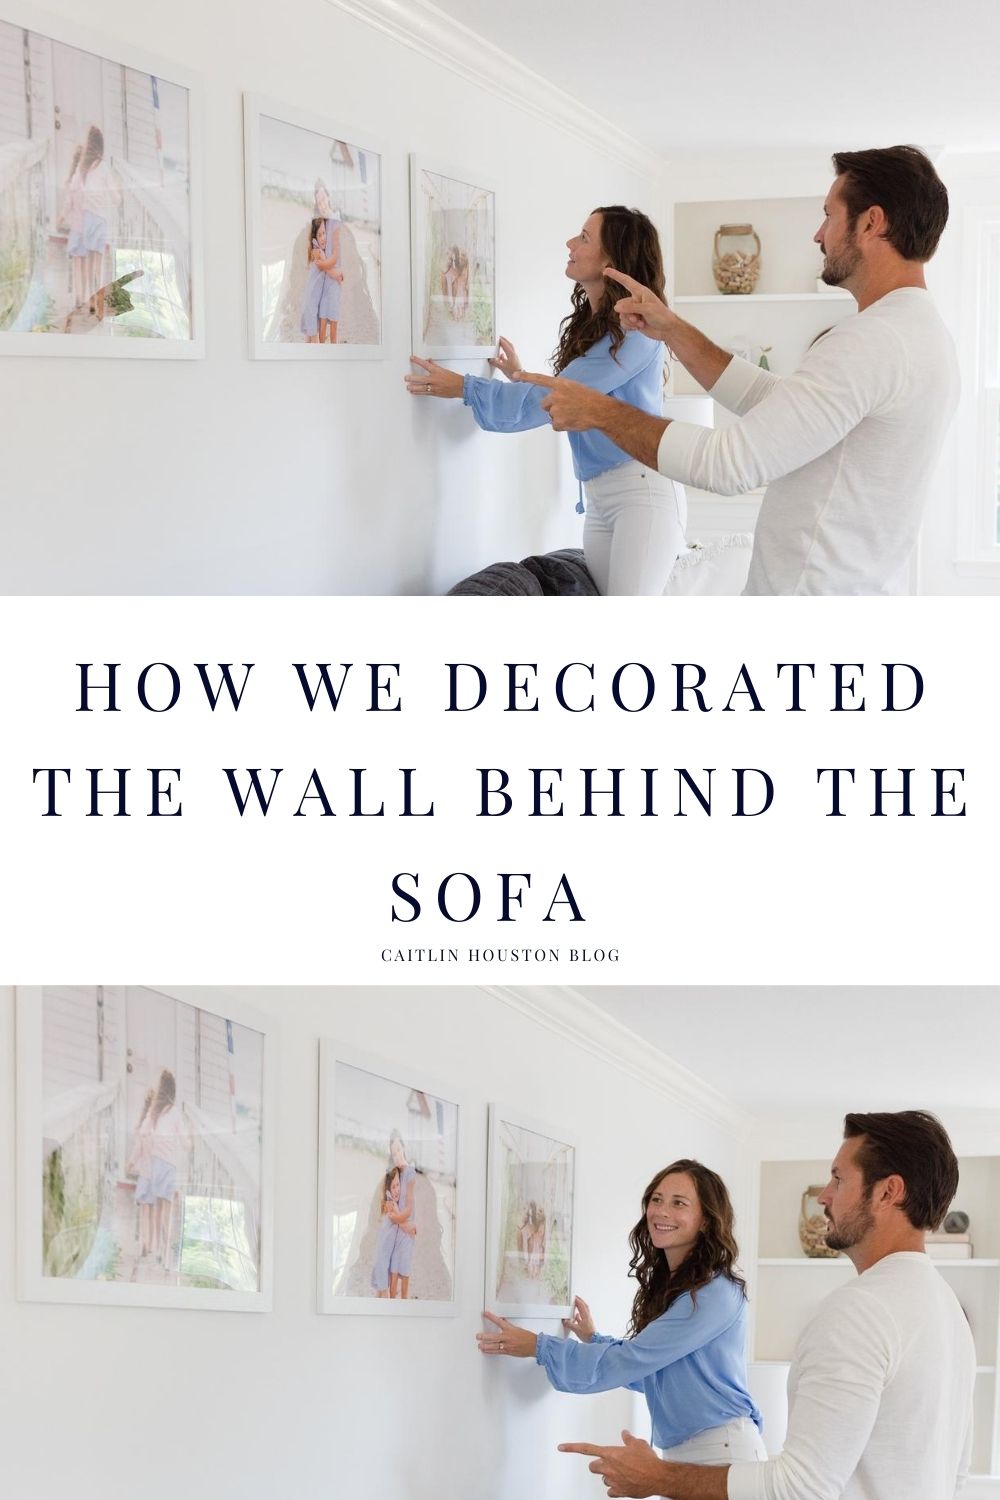 How to decorate the wall behind the sofa